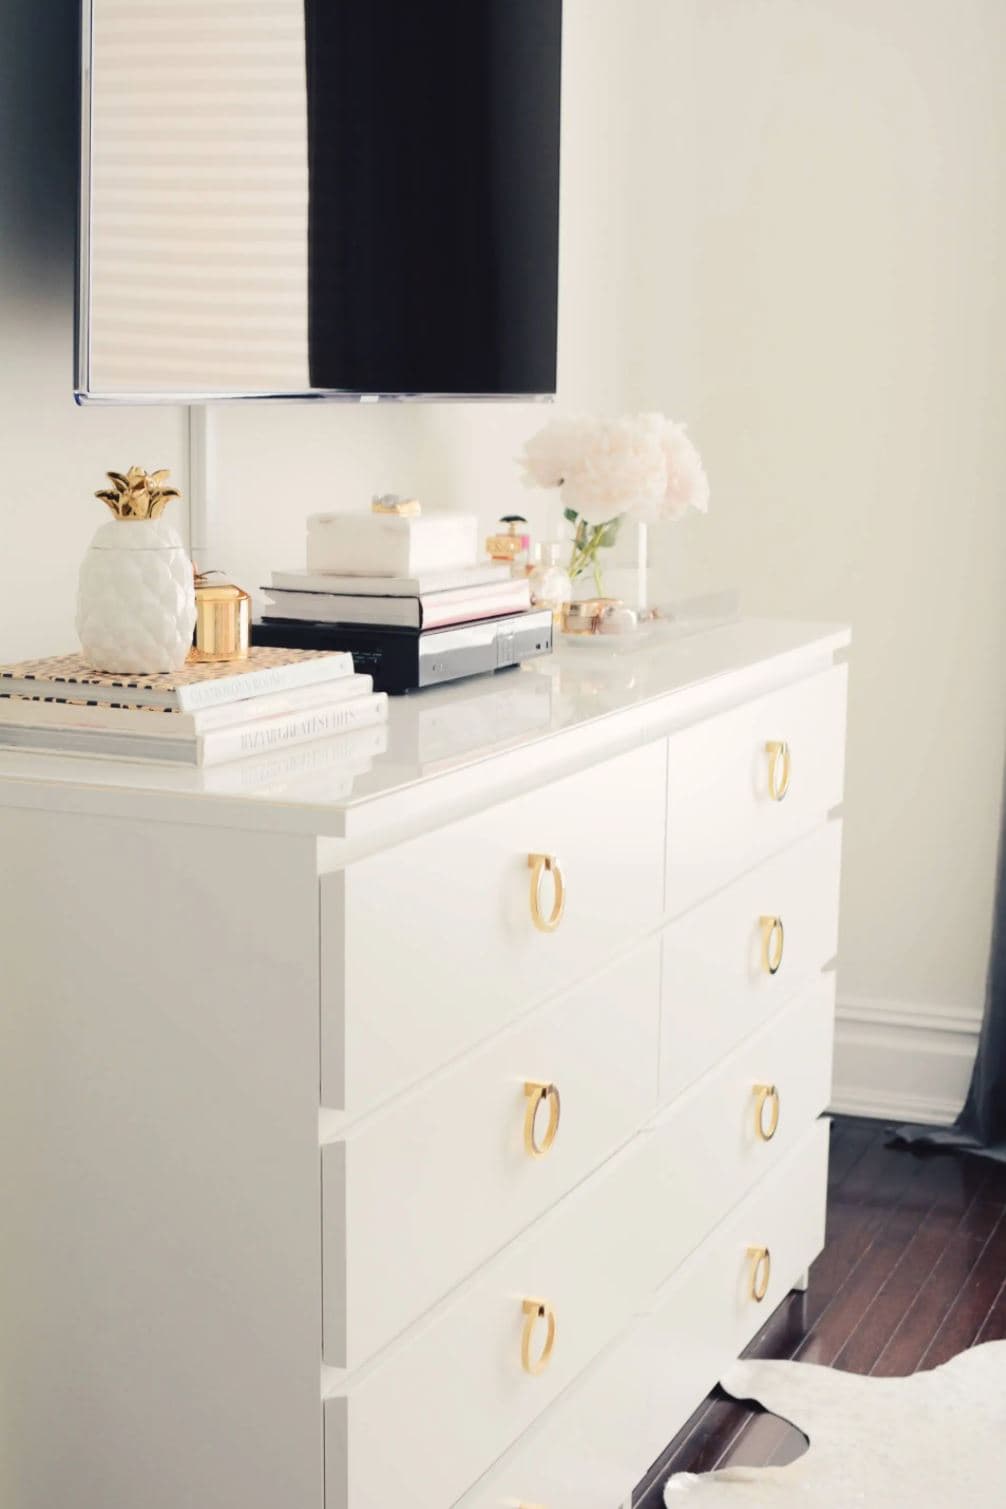 IKEA Malm dresser with brass knobs in a bedroom.